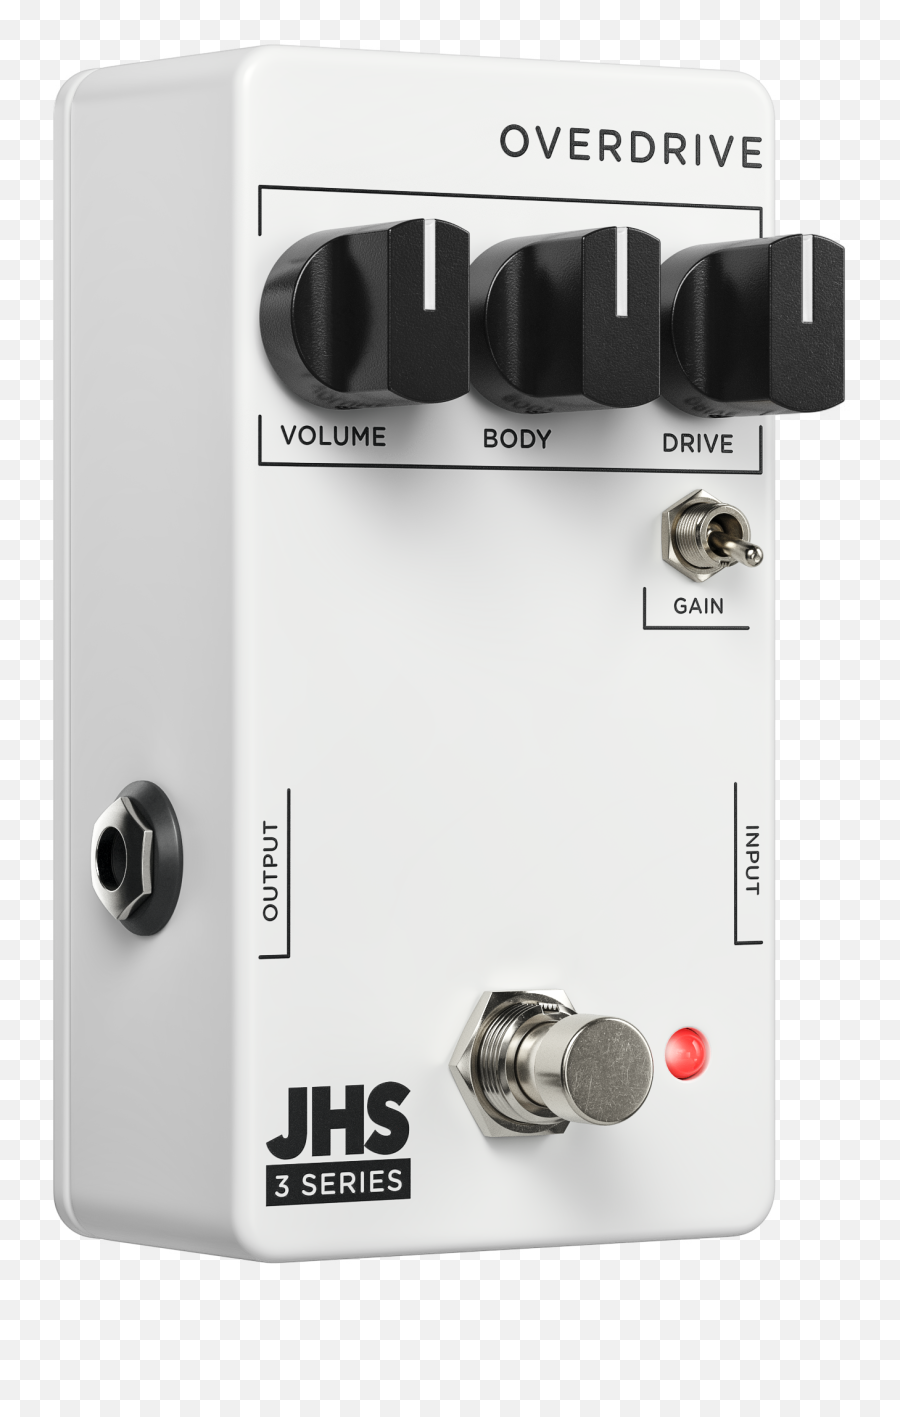 Jhs Pedals Kansas City Usau2014 3 Series - Overdrive Pedal Jhs 3 Series Png,Overdrive Icon